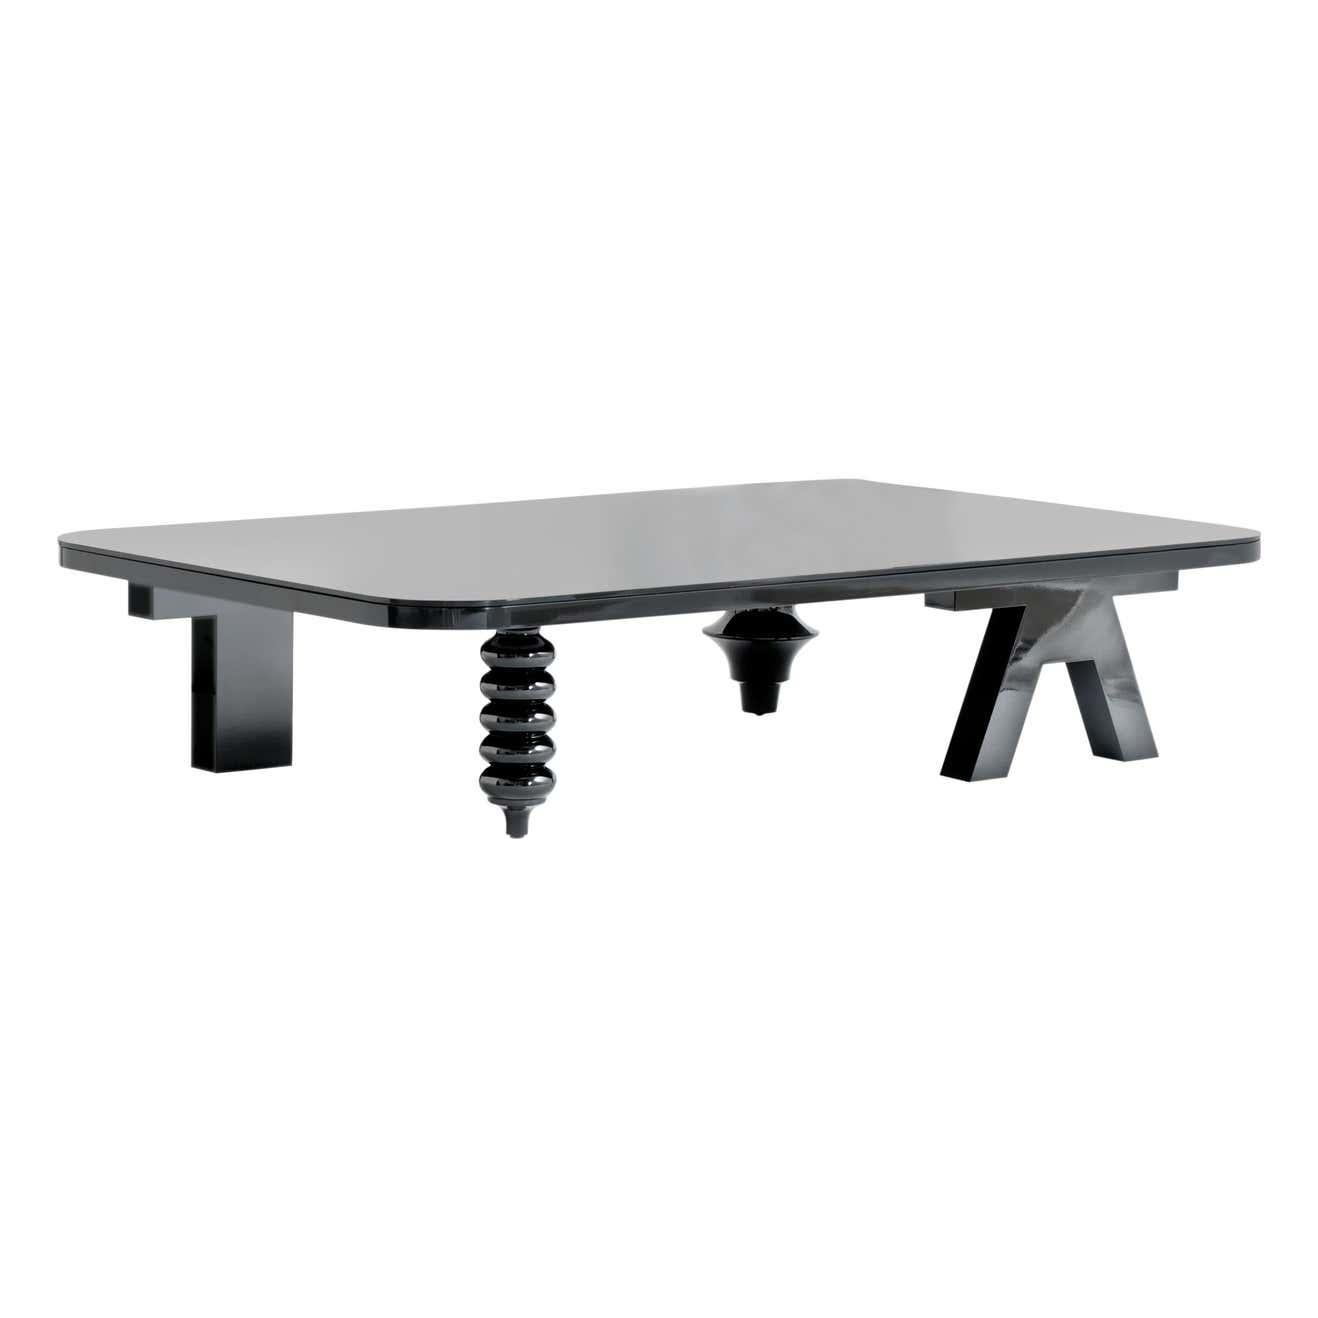 Rectangular Multi Leg Low Table High Gloss with Glass Top For Sale